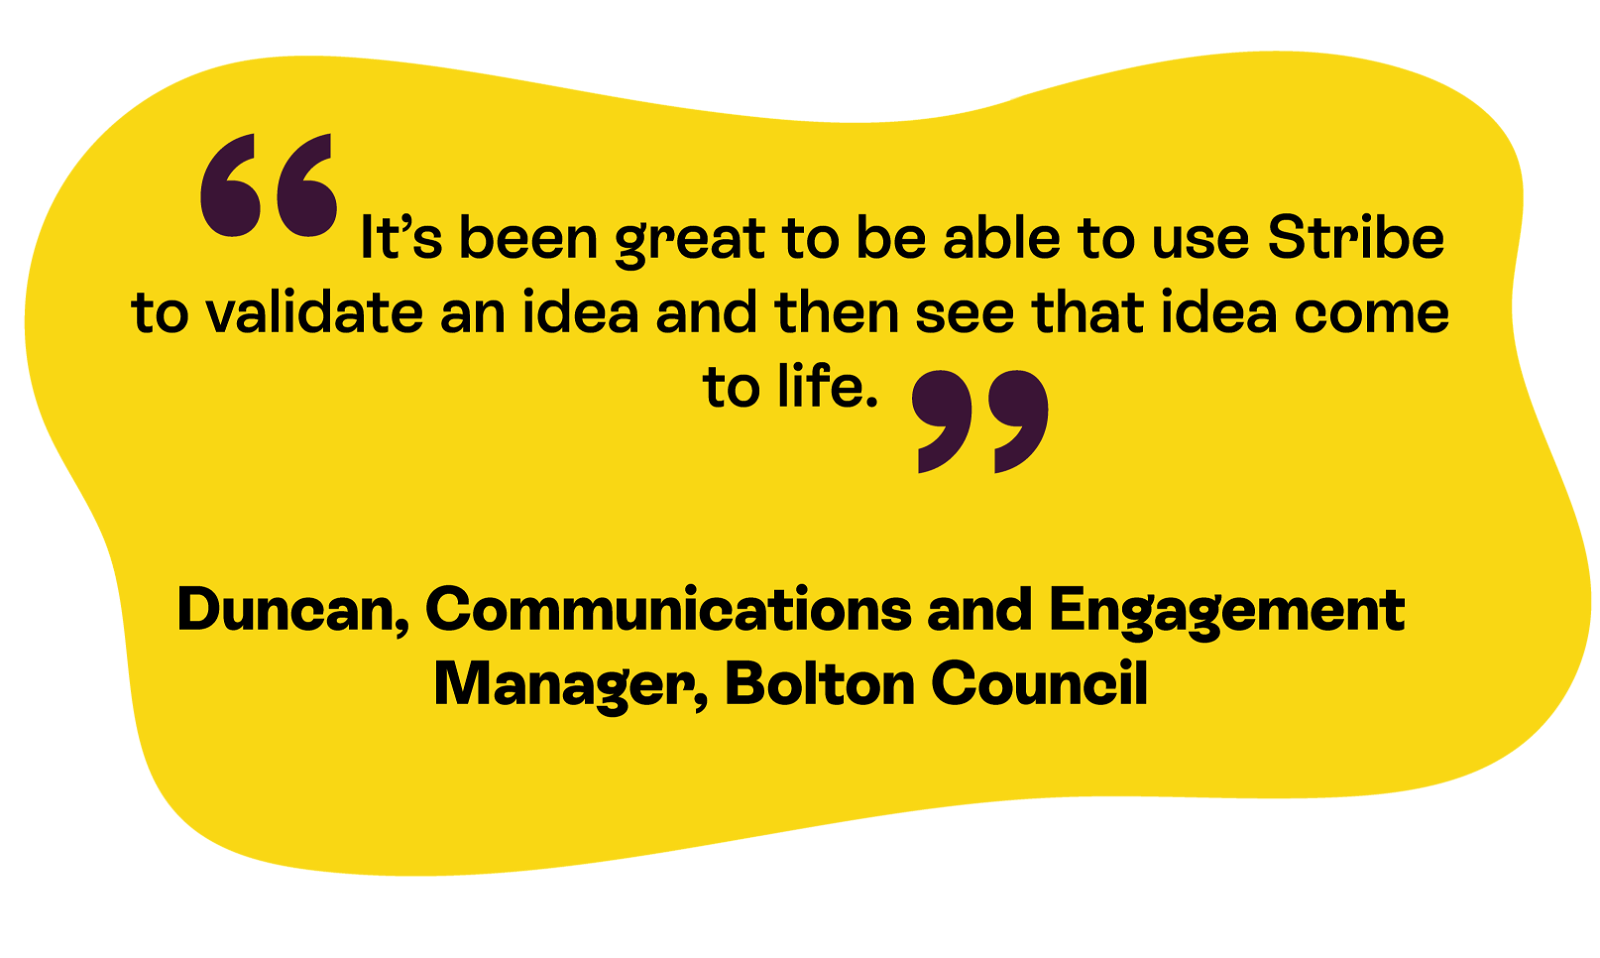 A positive testimonial for Stribe from a manager at Bolton Council.